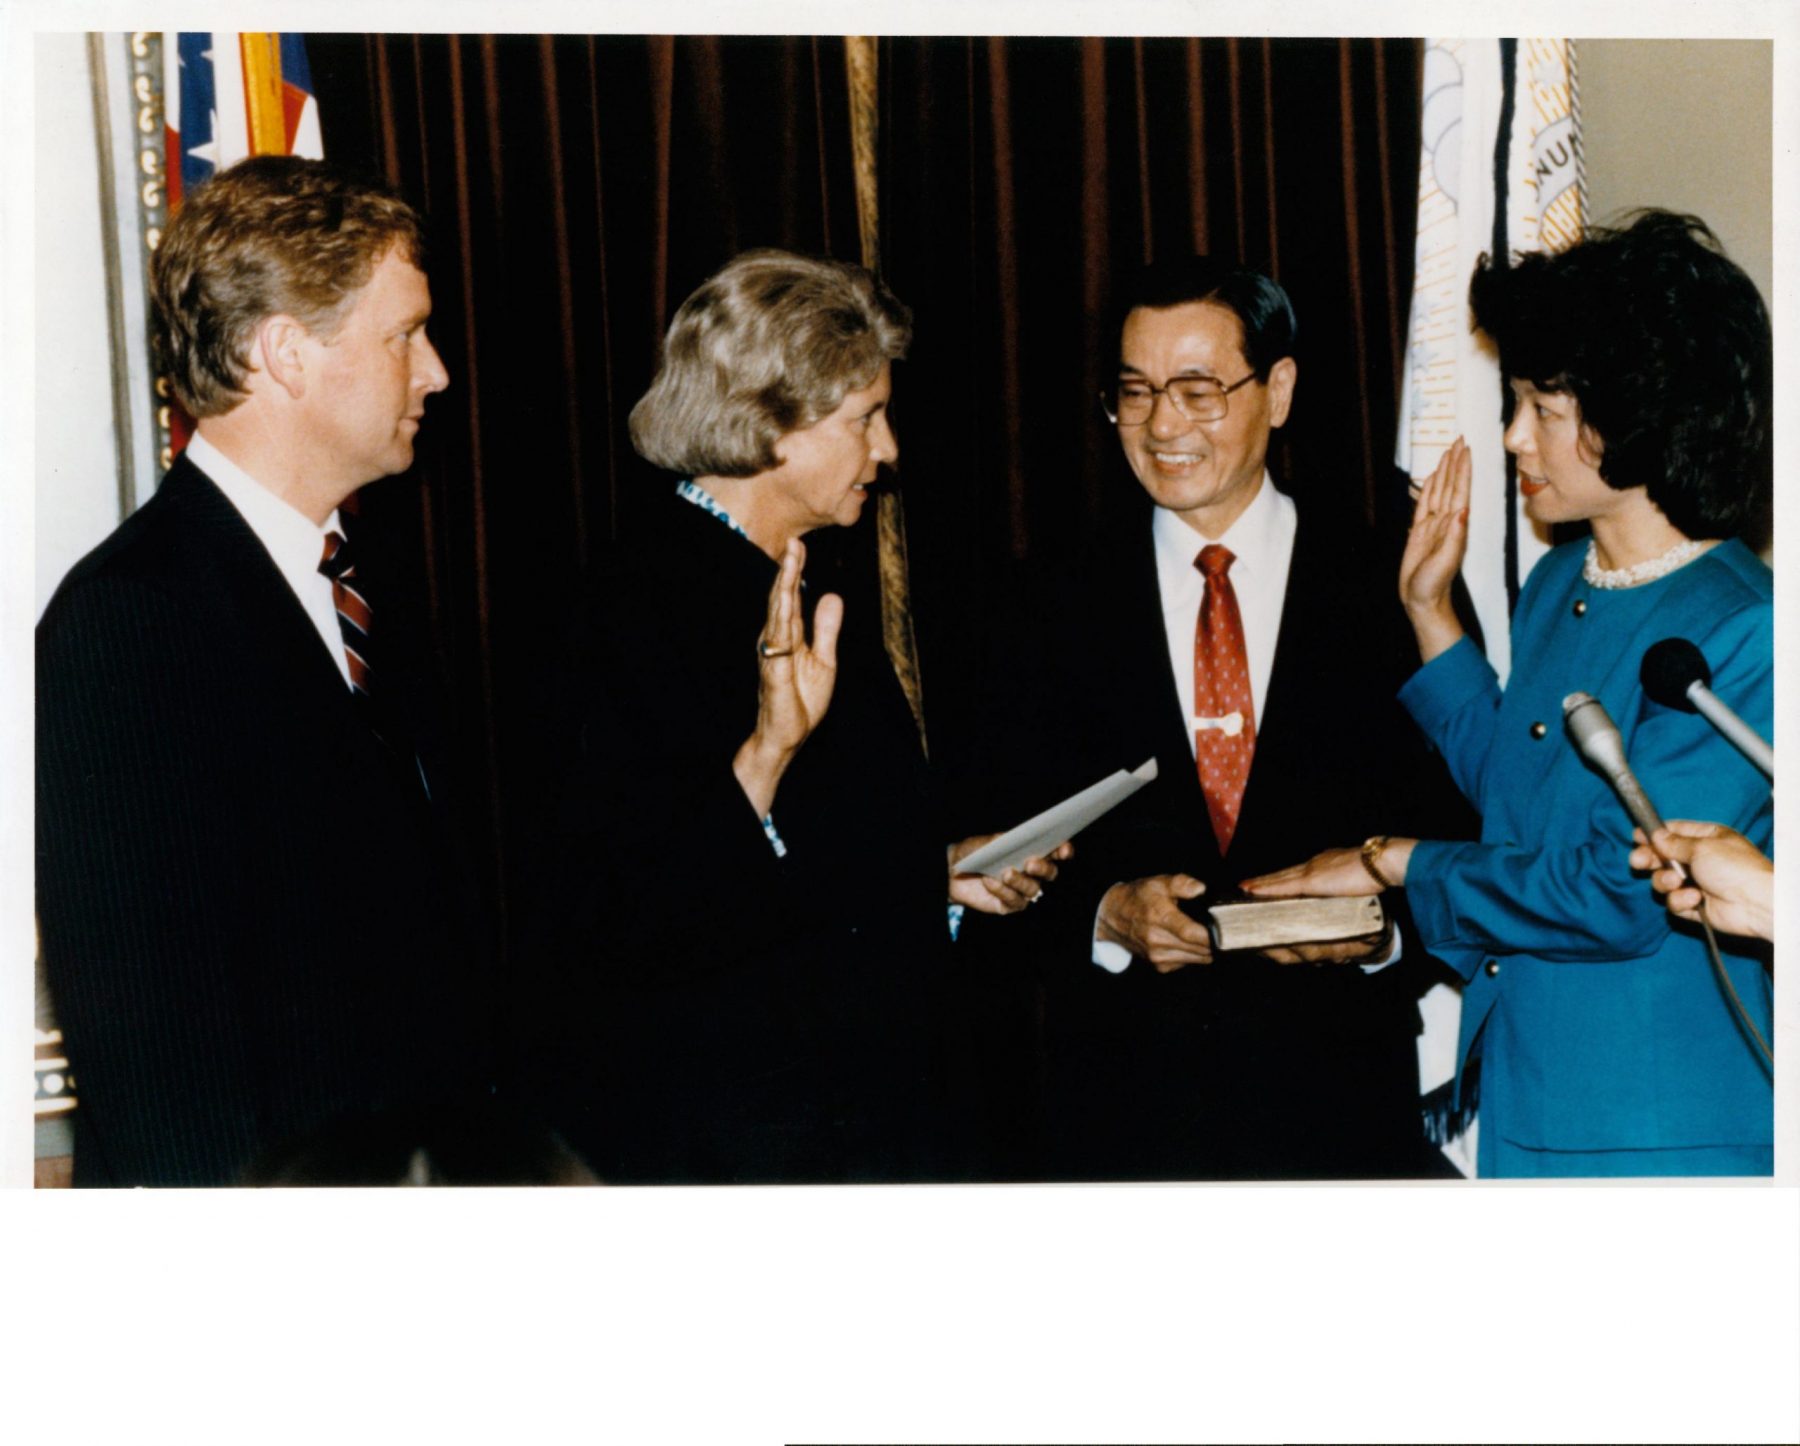 Elaine Chao being sworn in as U.S. Deputy Secretary of Transportation by Supreme Court Justice Sandra Day O'Connor with father, Dr. James S. C. Chao, holding the Bible and Vice President Dan Quayle witnessing.